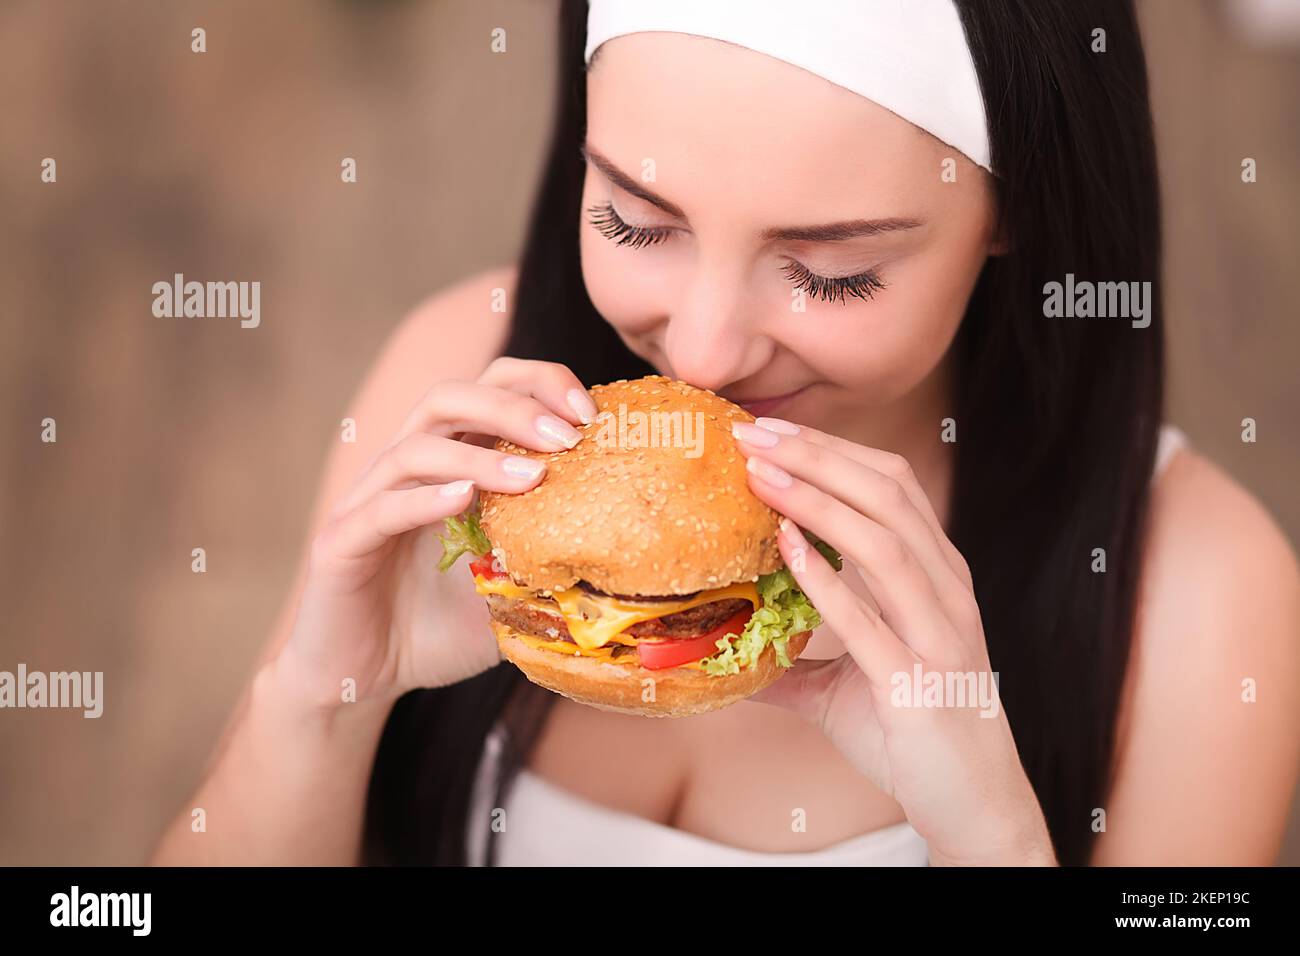 Young woman in a fine dining restaurant eat a hamburger, she behaves improperly Stock Photo